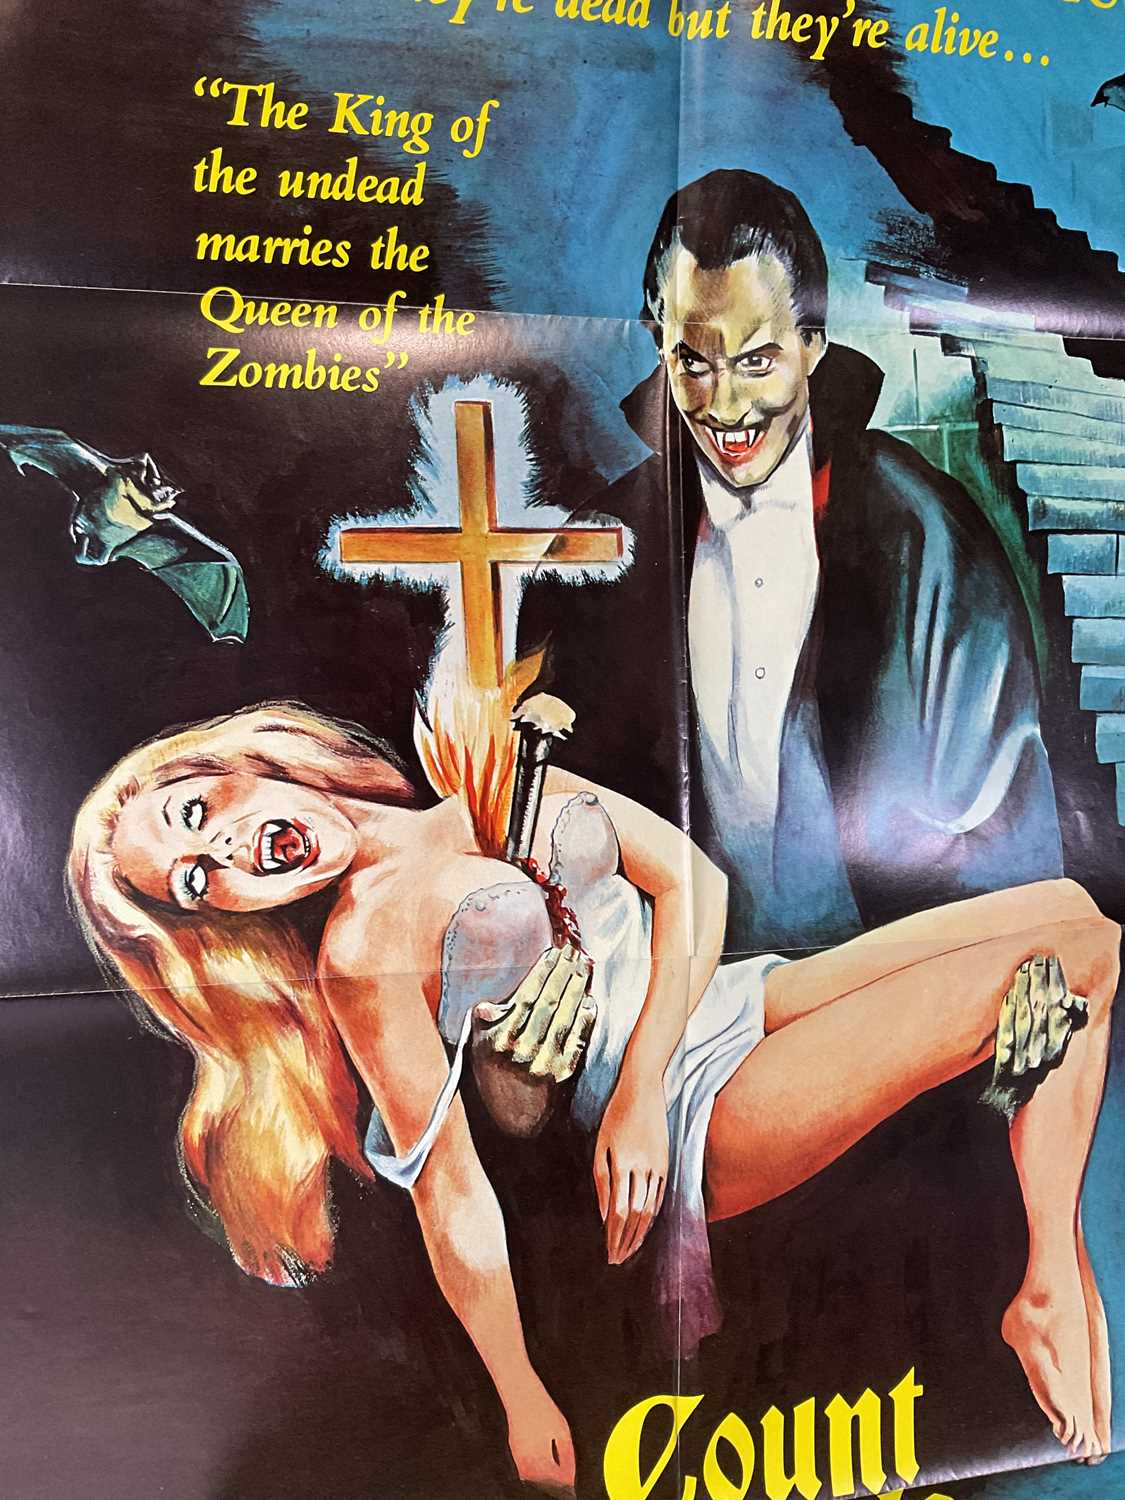 COUNT DRACULA AND HIS VAMPIRE BRIDE (1978) US one sheet movie poster, released in the UK - Image 6 of 6